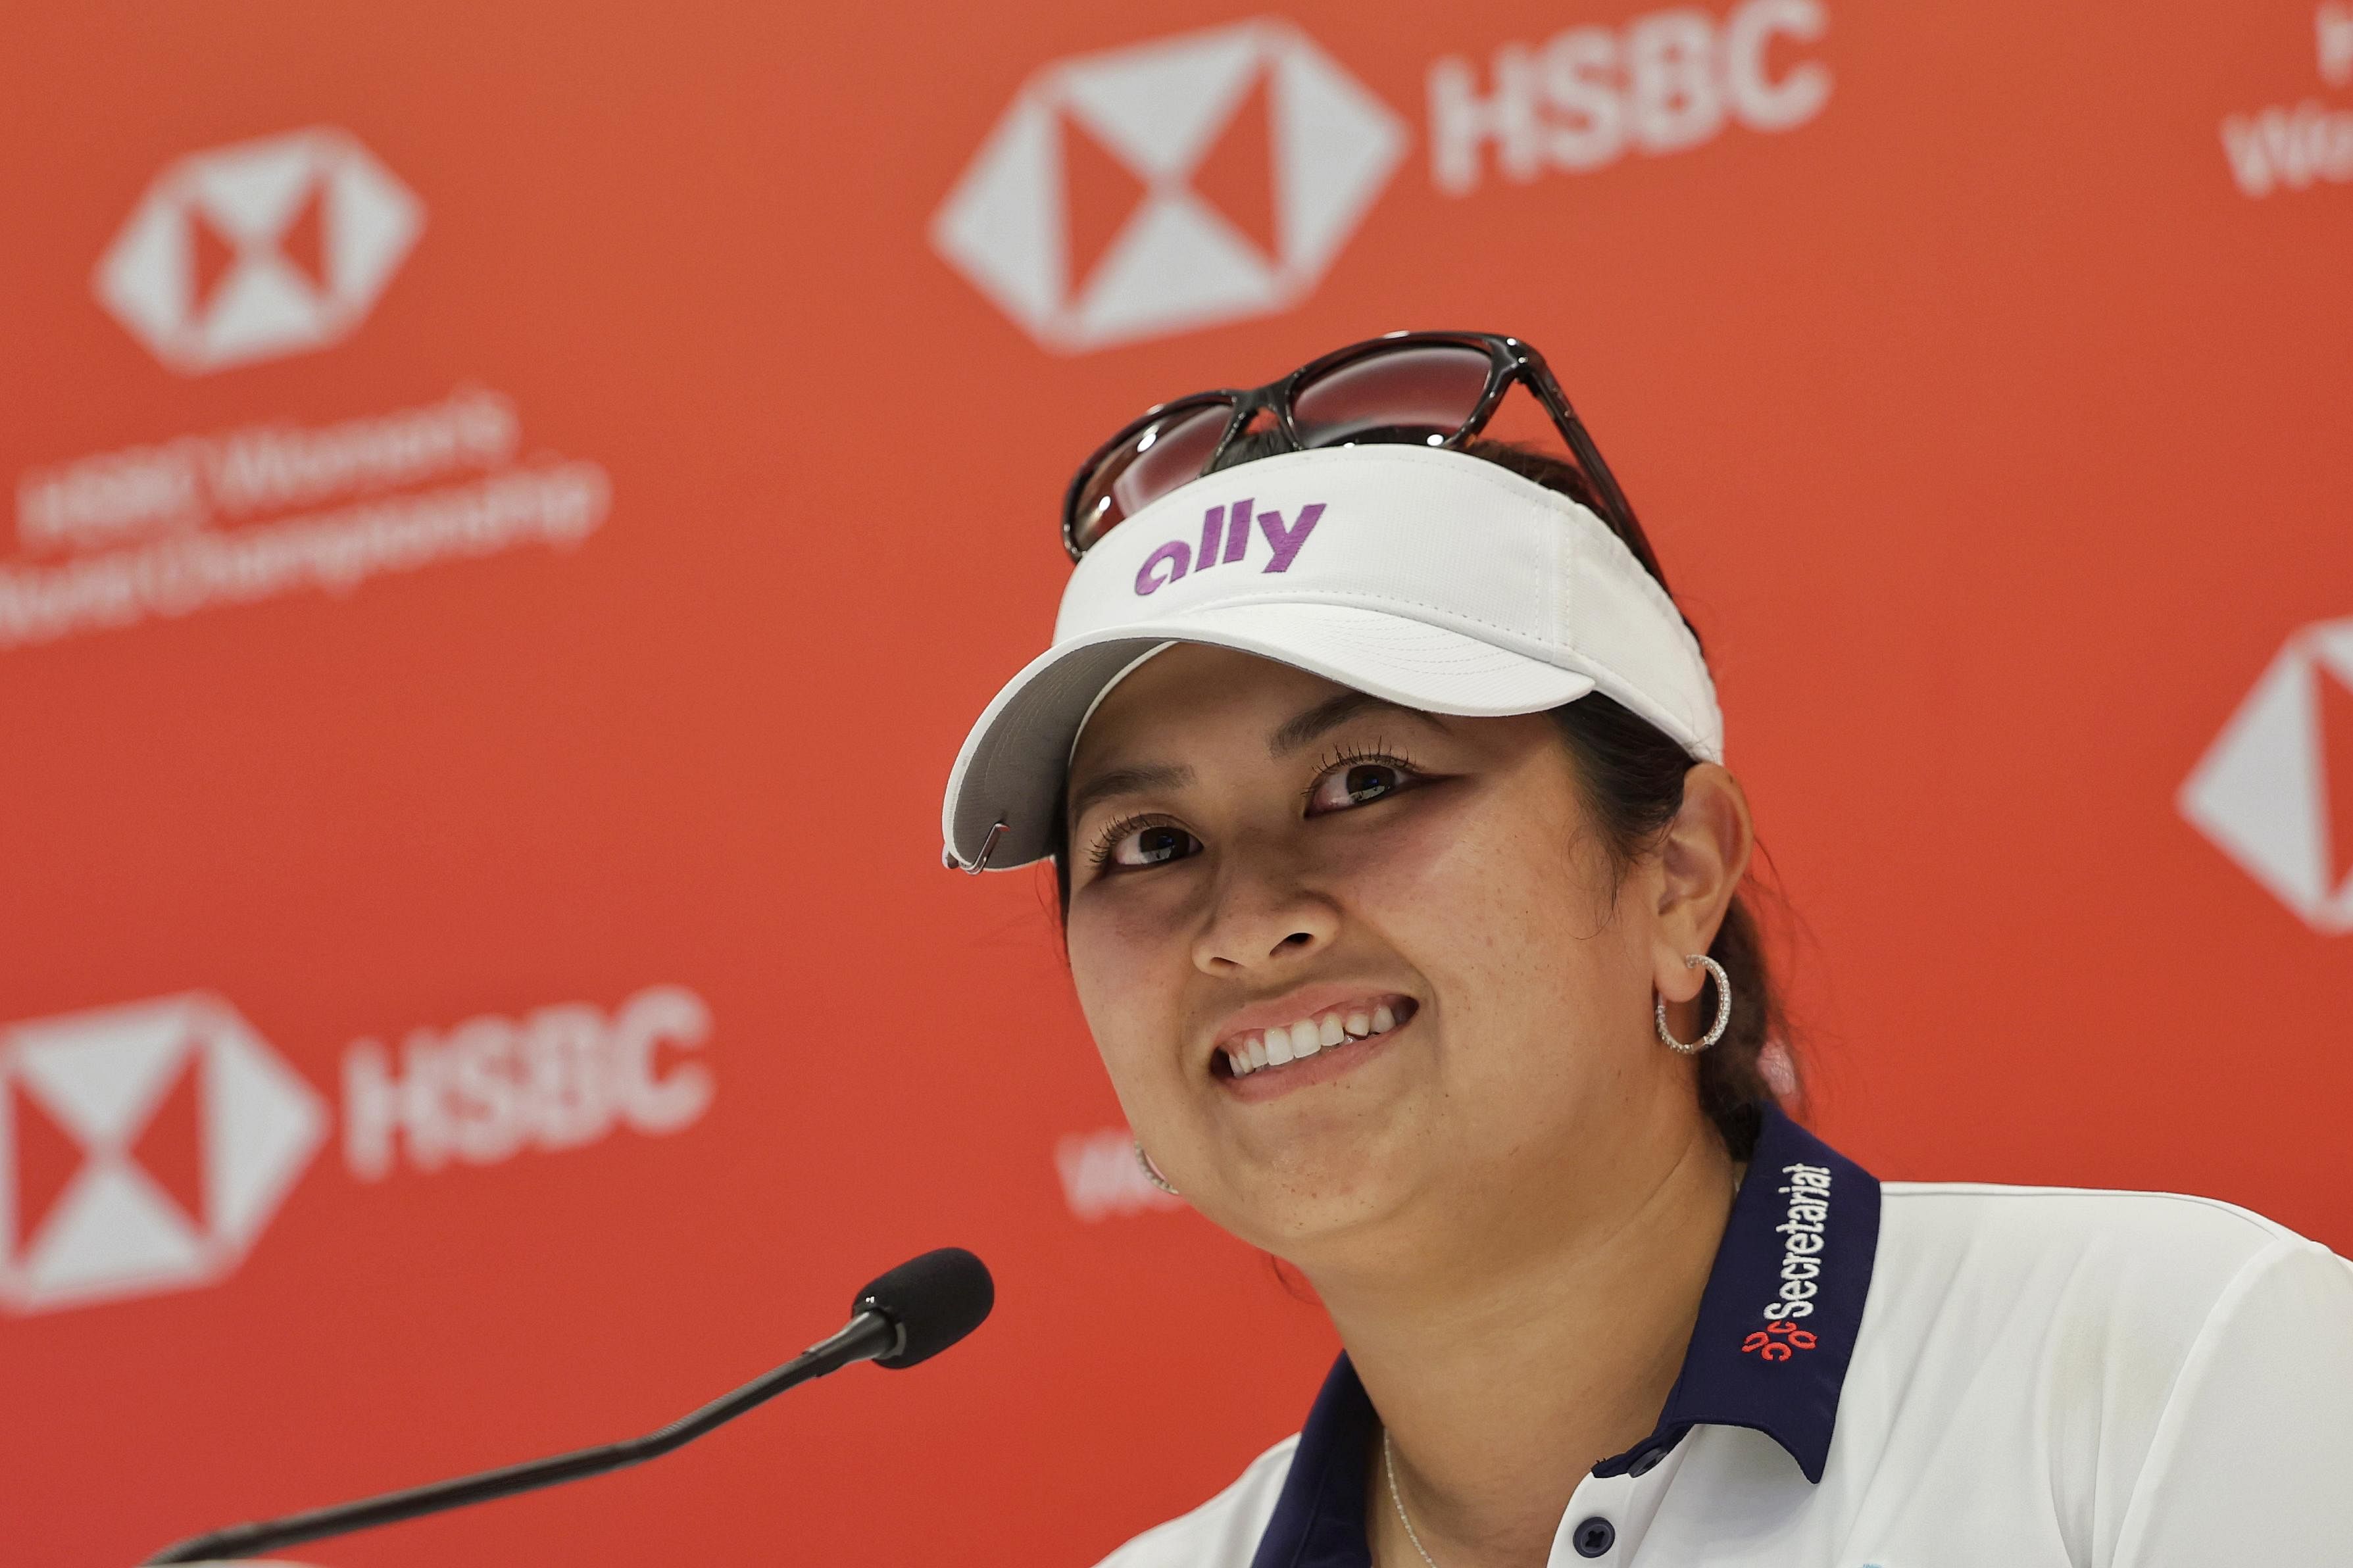 Lilia Vu’s late grandfather taught her resilience; she’s now the world No. 1 in women’s golf